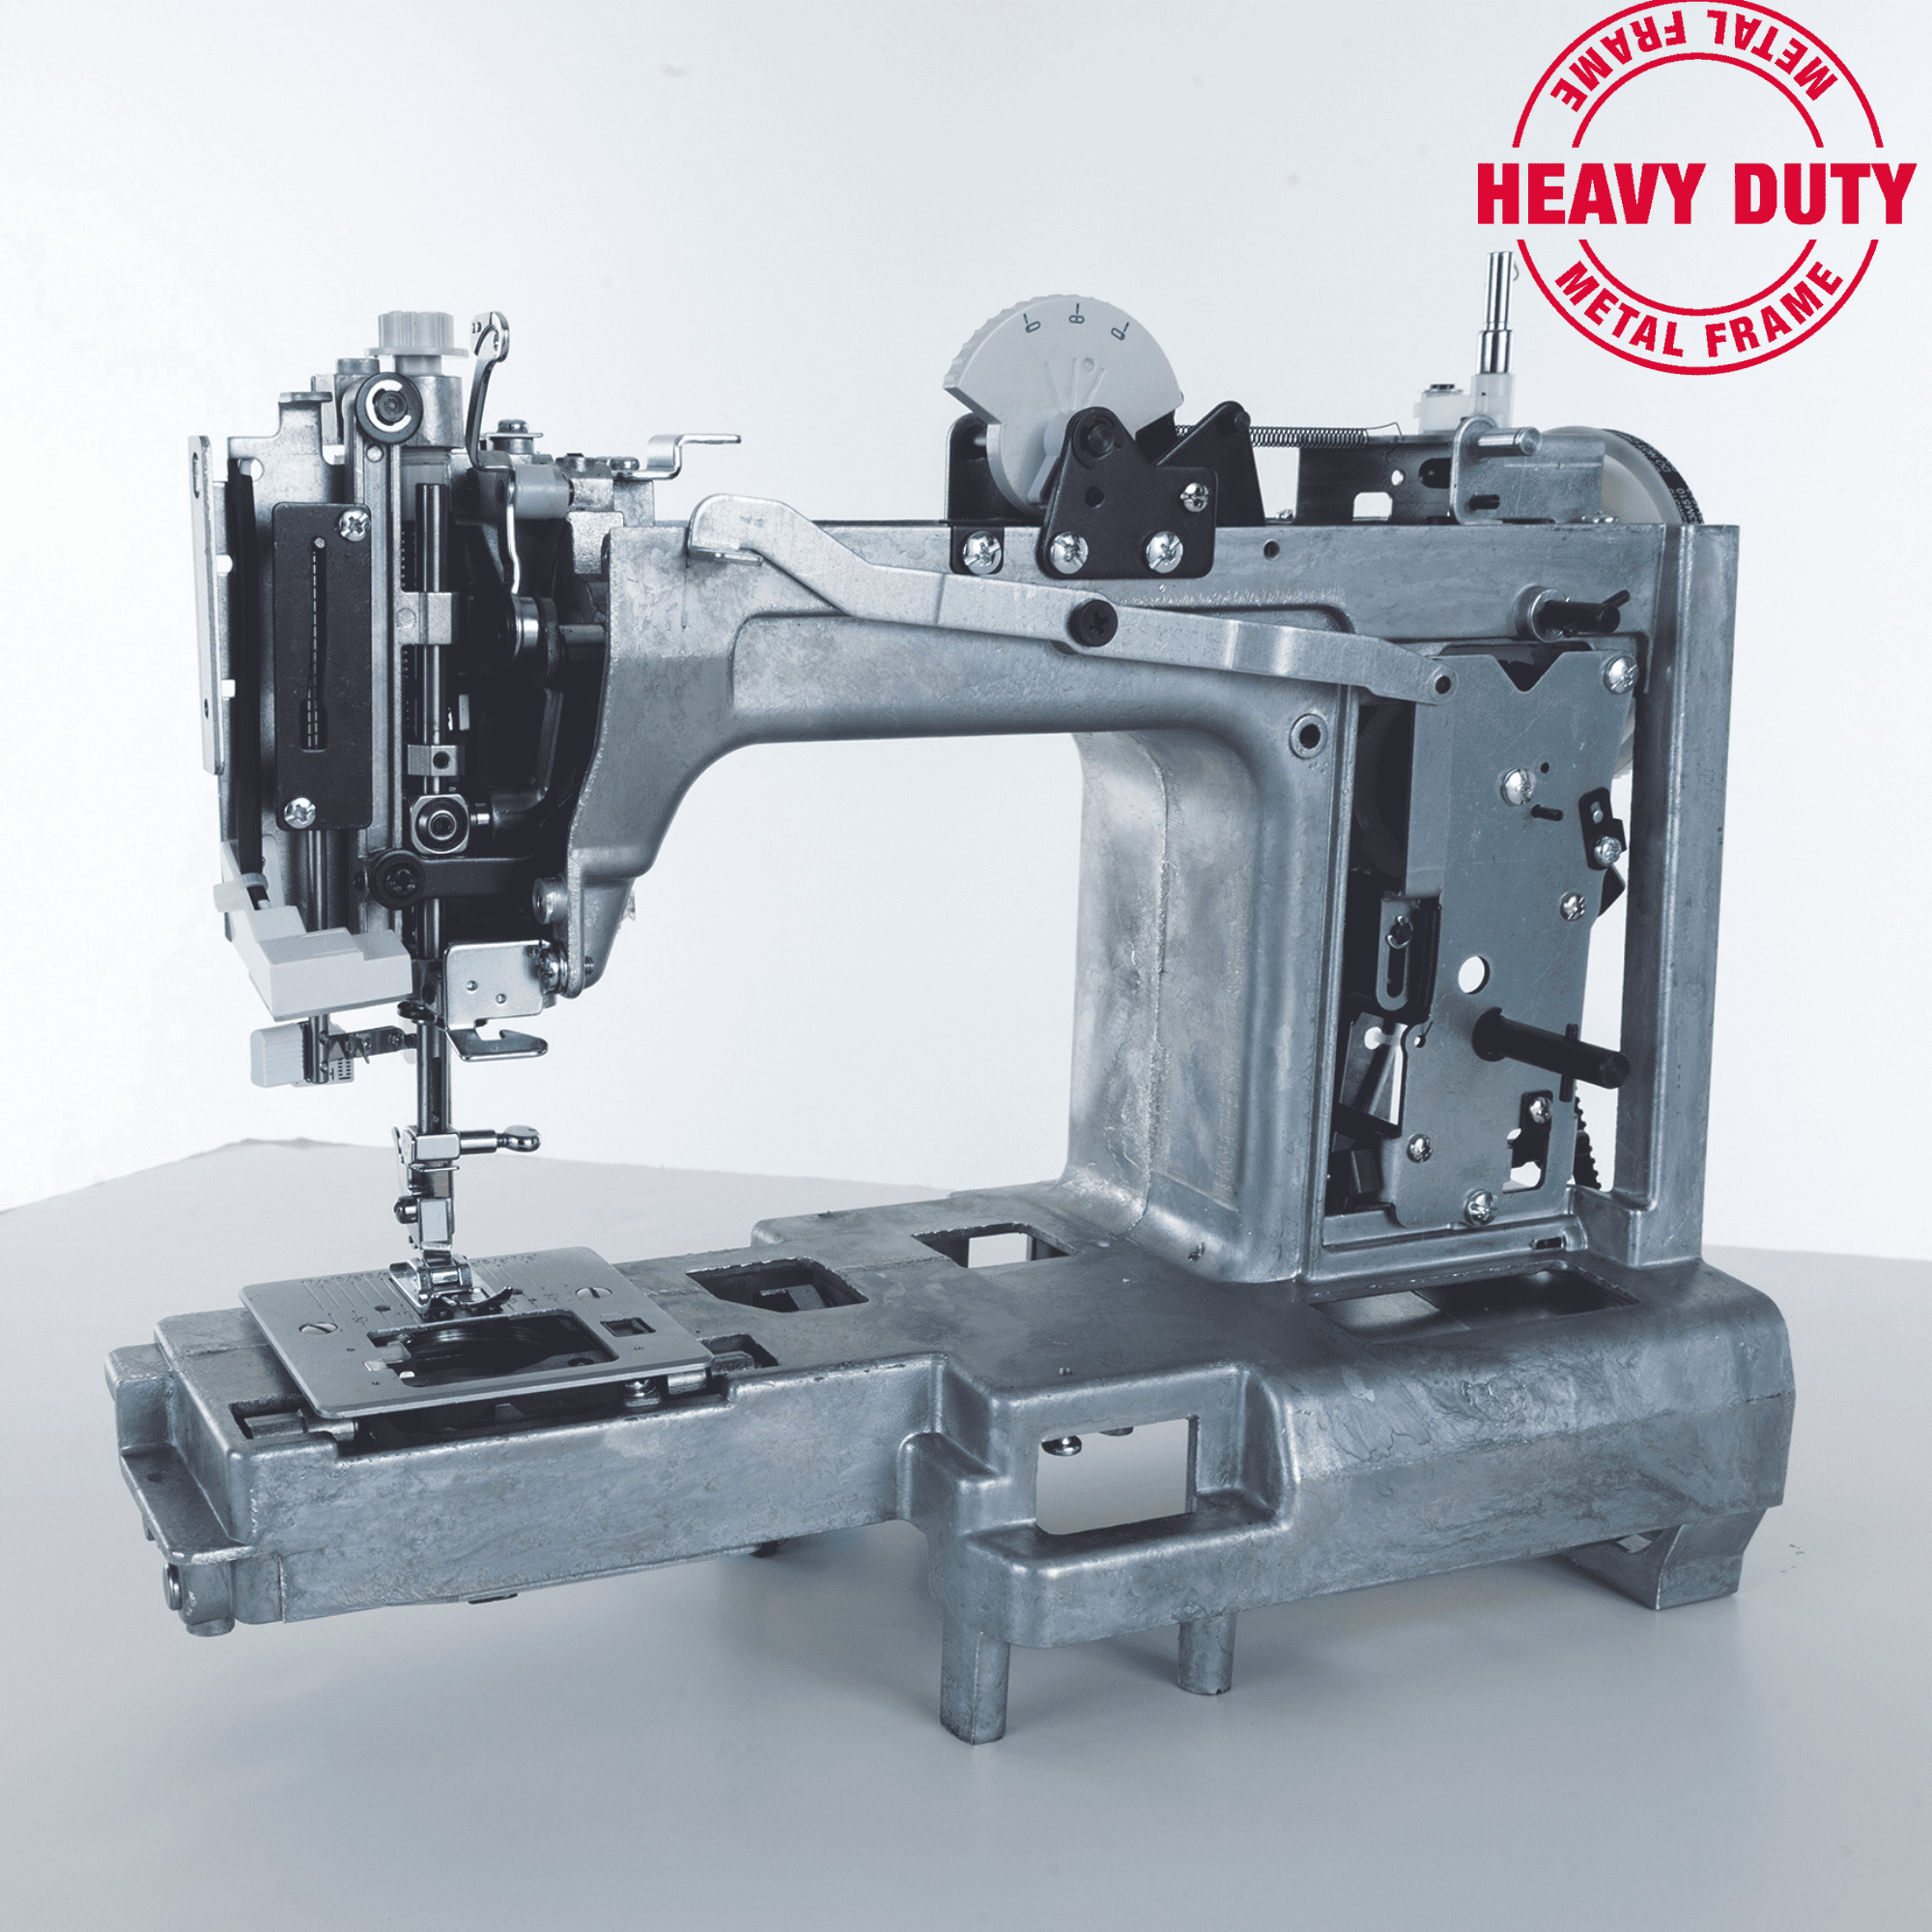 Meet the Heavy Duty 4432 Sewing Machine - Special Edition Black 